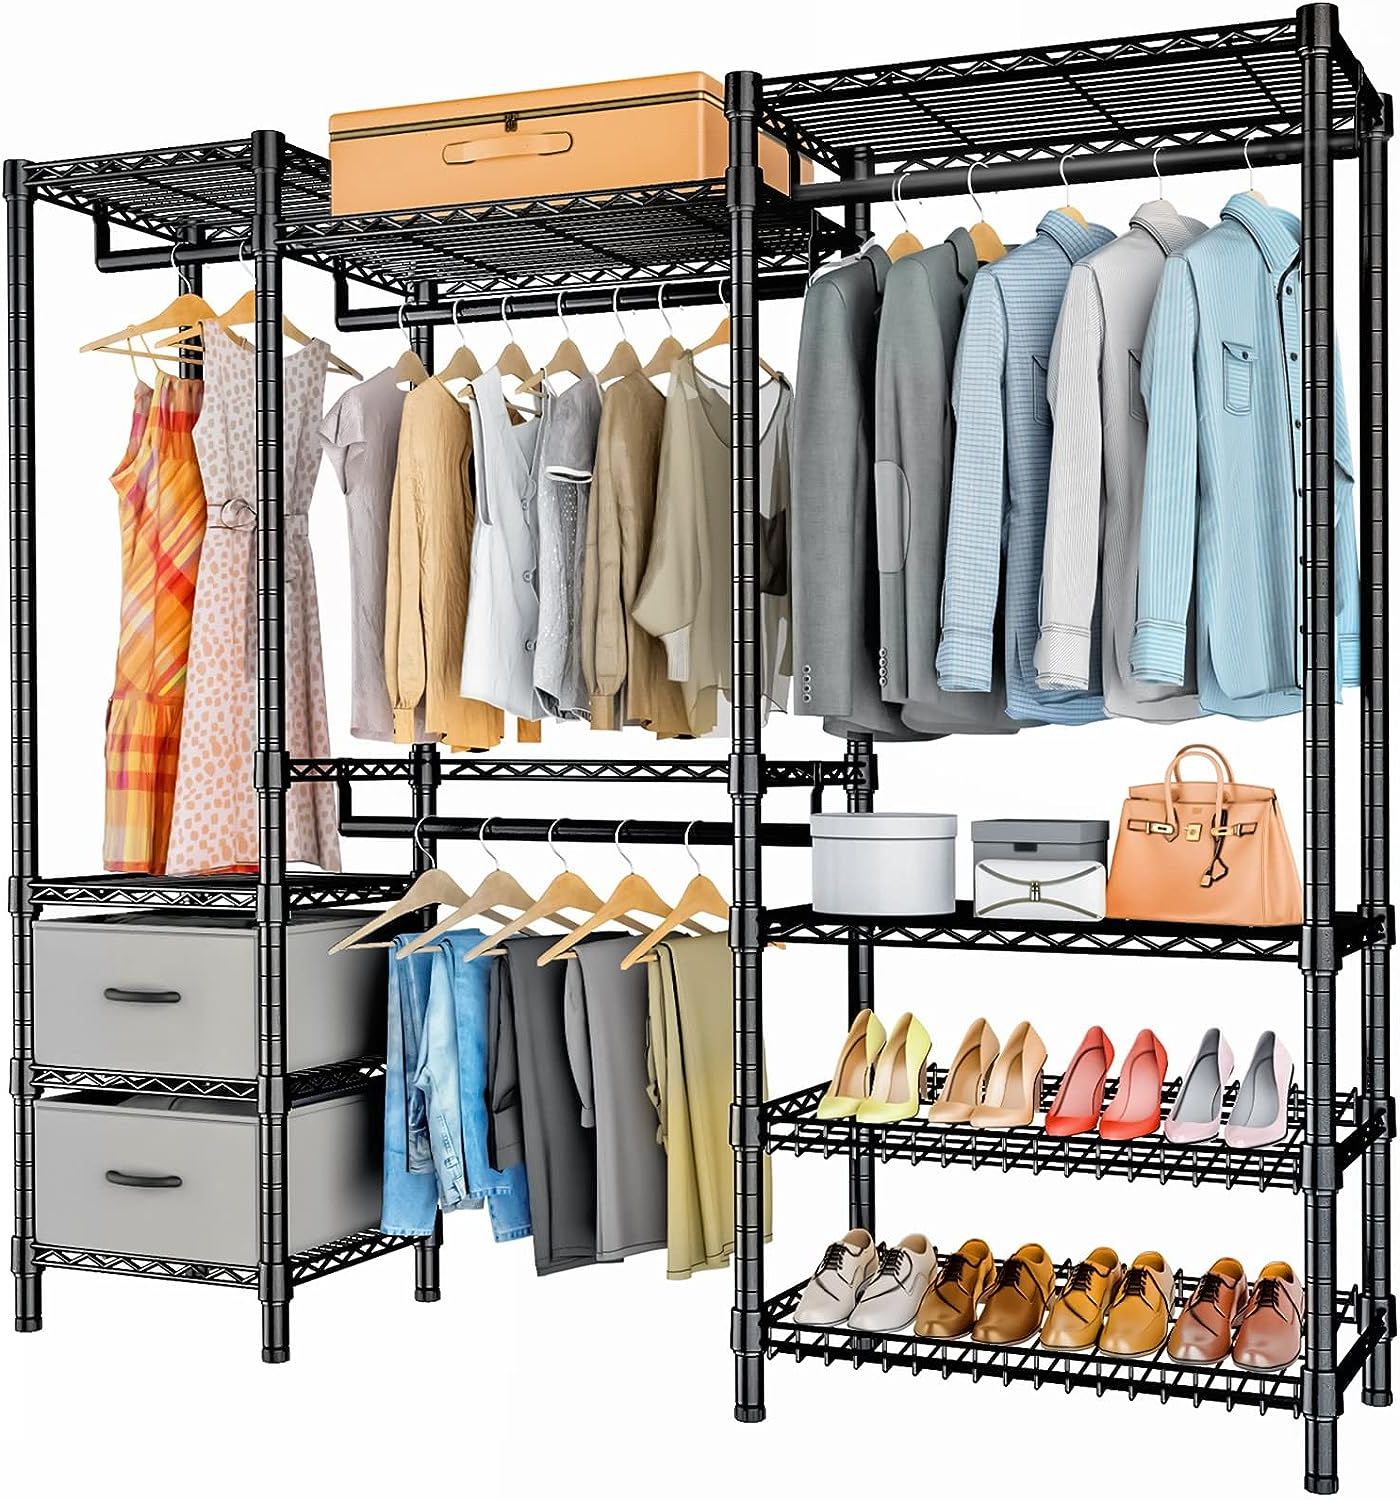 Vipek V8 Wire Garment Rack 5 Tiers Heavy Duty India | Ubuy With 5 Tiers Wardrobes (Gallery 16 of 20)